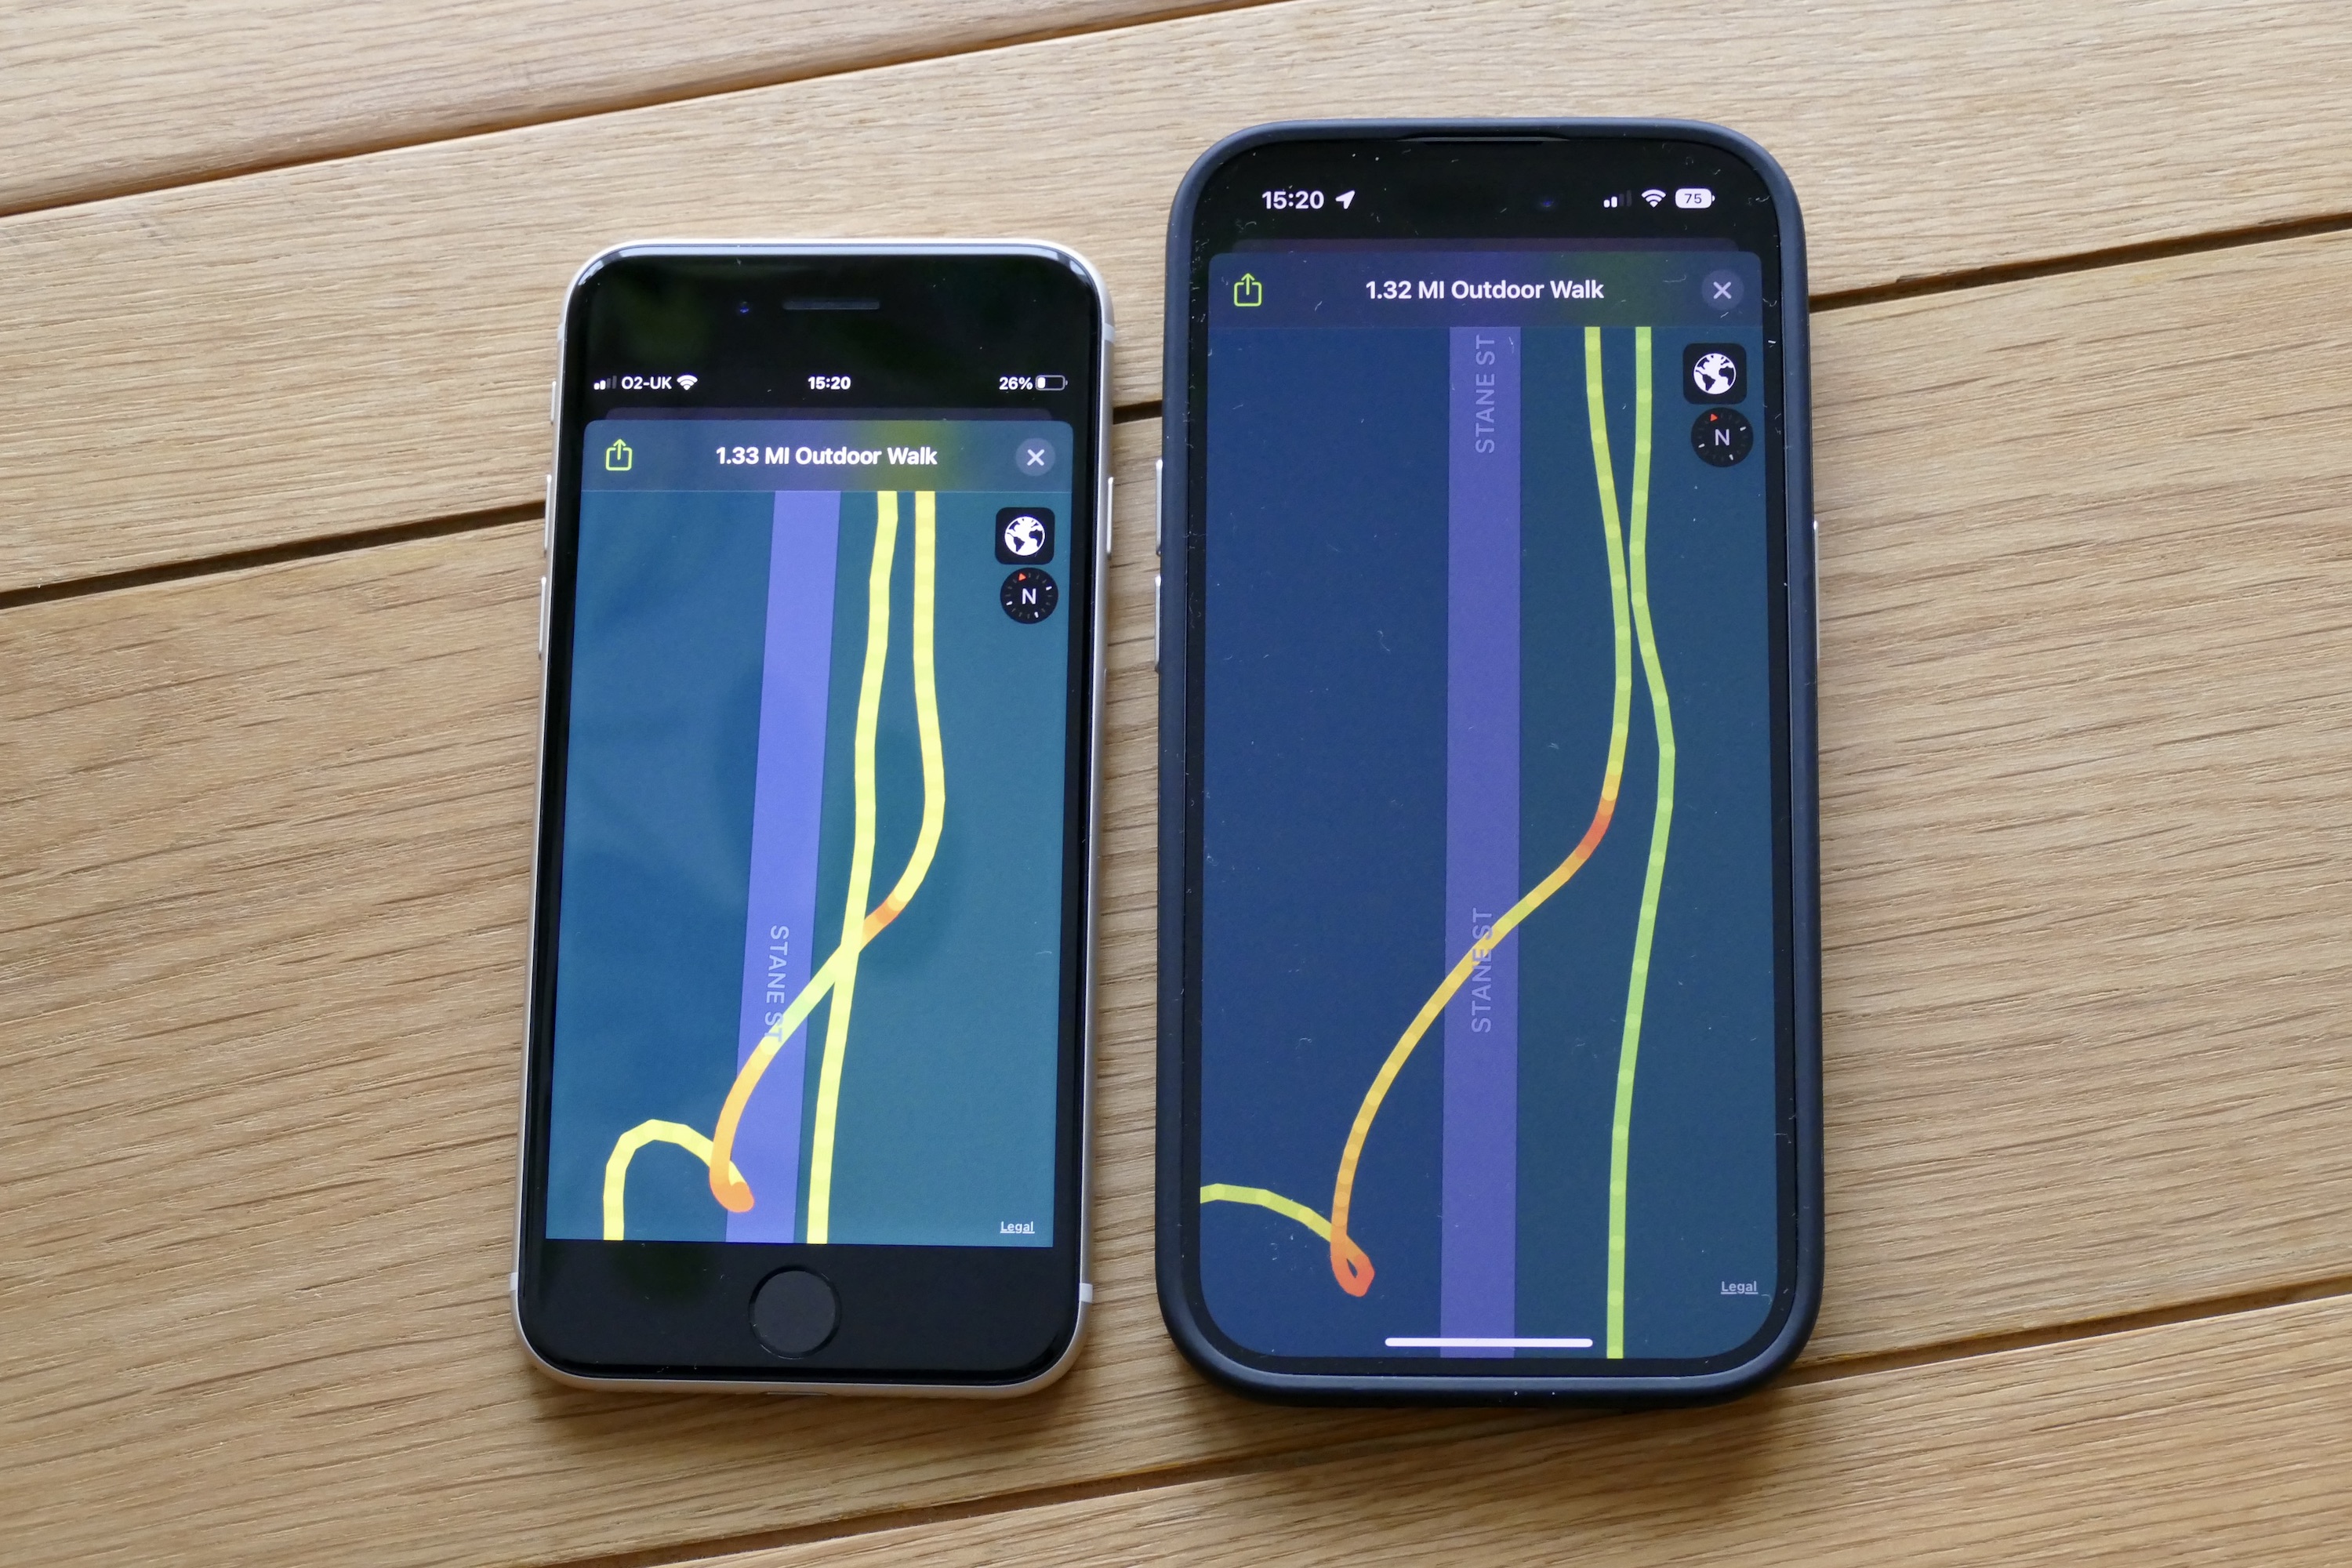 GPS map data from an Apple Watch Ultra and the Apple Watch Series 8 shown on an iPhone 14 Pro and iPhone SE 2022.